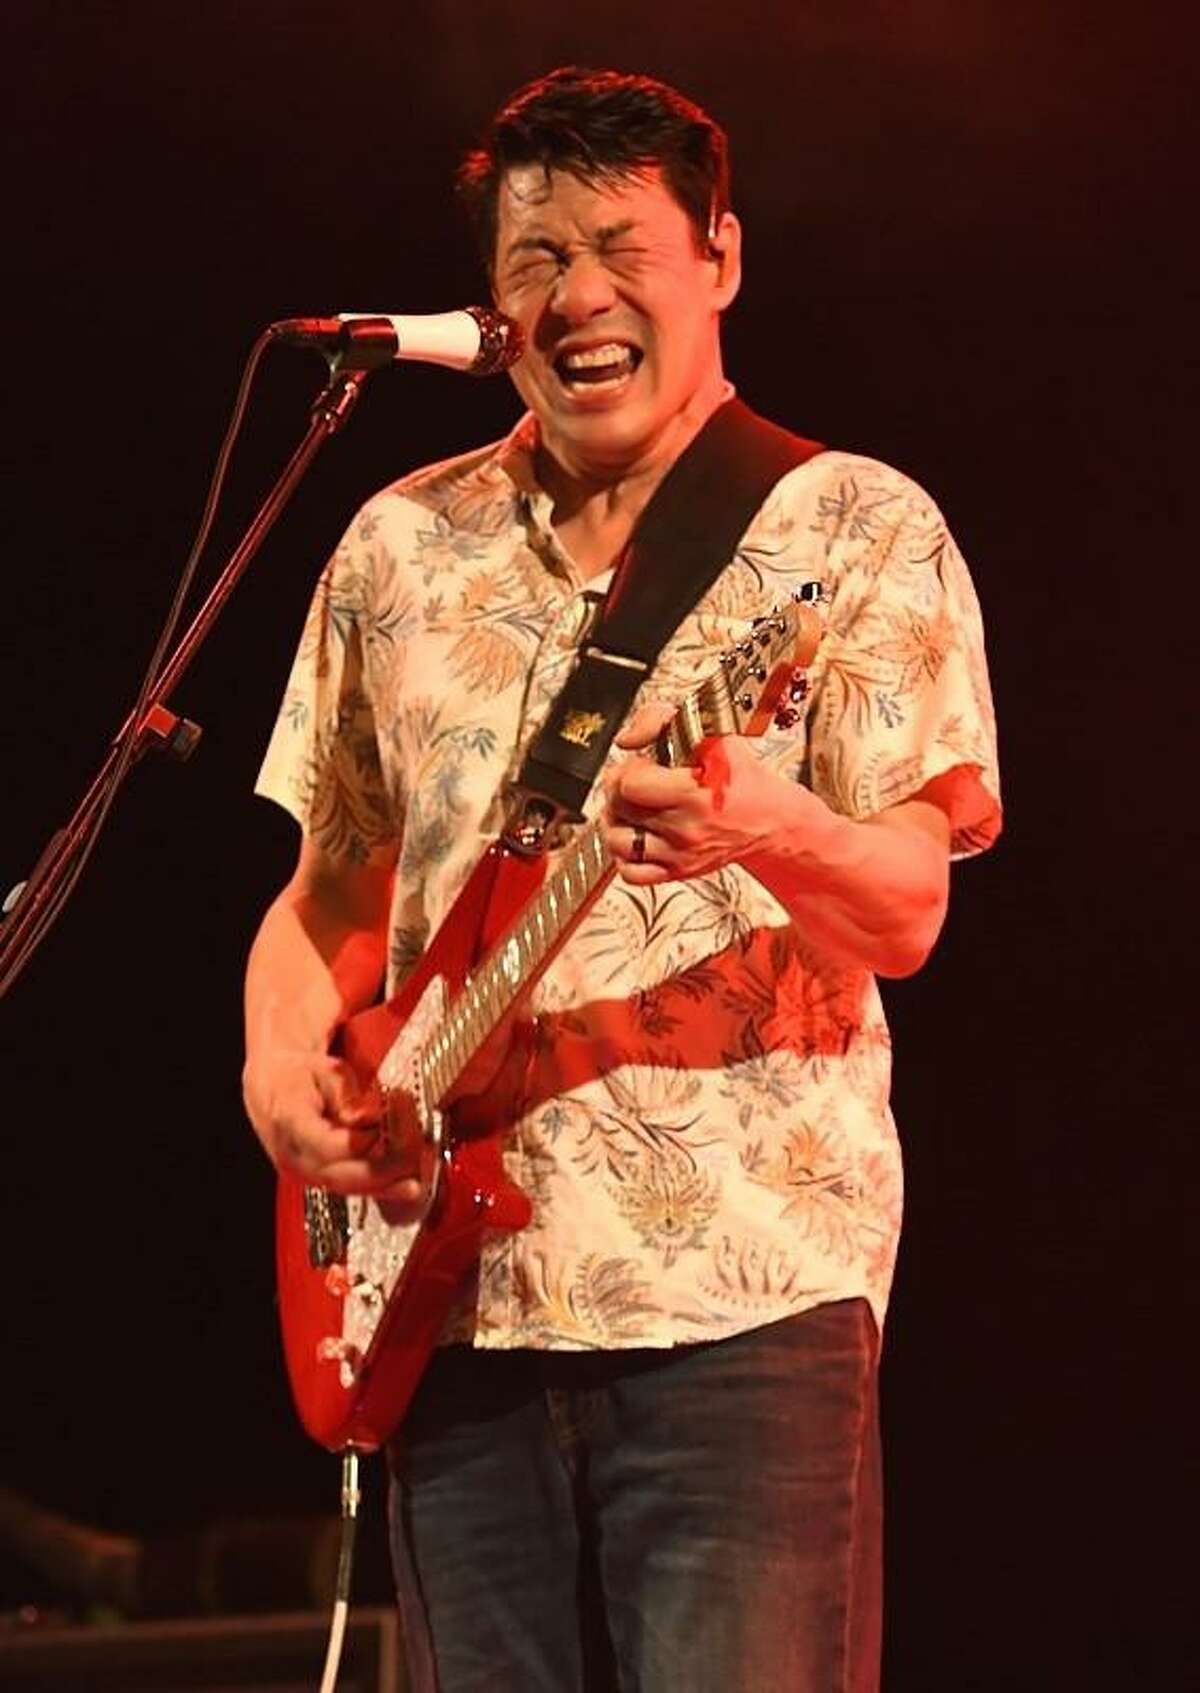 Singer, songwriter and guitarist Todd Park Mohr of Big Head Todd & The Monsters is shown performs on stage at the Infinity Music Hall in Hartford on June 28, 2019. The band has released more than ten albums since 1989 with their 1993 album “Sister Sweetly” going platinum in the United States. The band has developed a sizable following, especially in the mountain states of the United States. The band is currently on tour in support of their latest release "New World Arisin”. To view the long list of upcoming entertainment coming to the Infinity Music Hall you can visit www.infinityhall.com